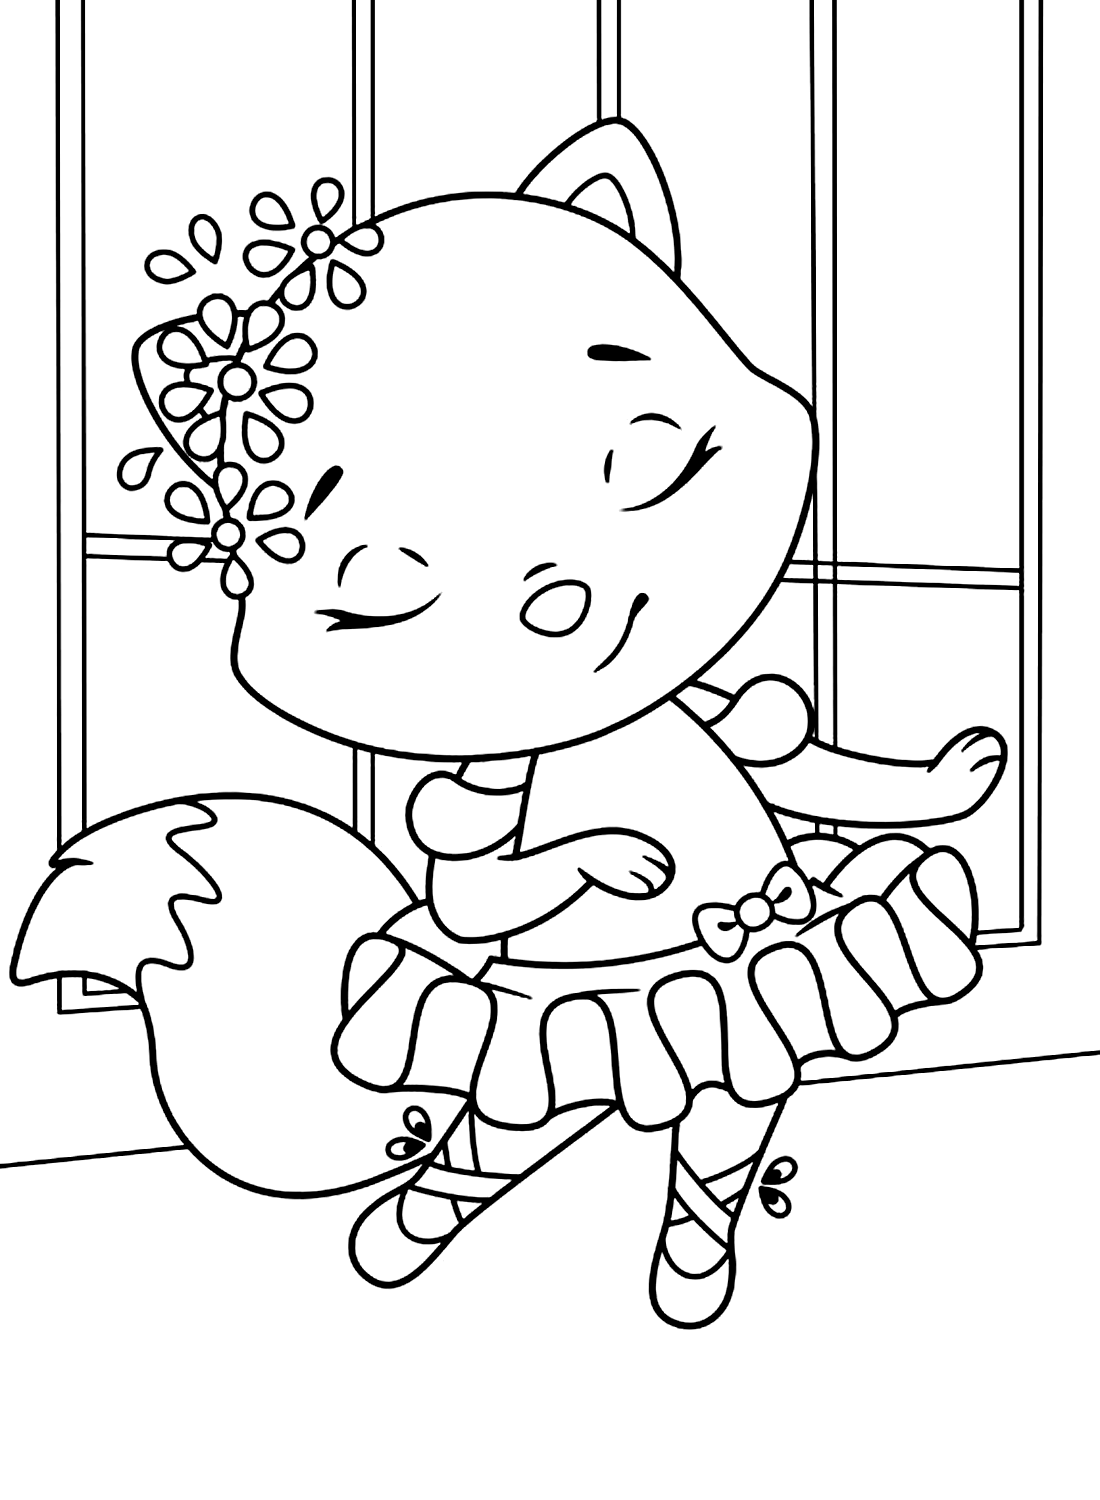 Coloring Sheet of Adorable Ballerina Coloring Page